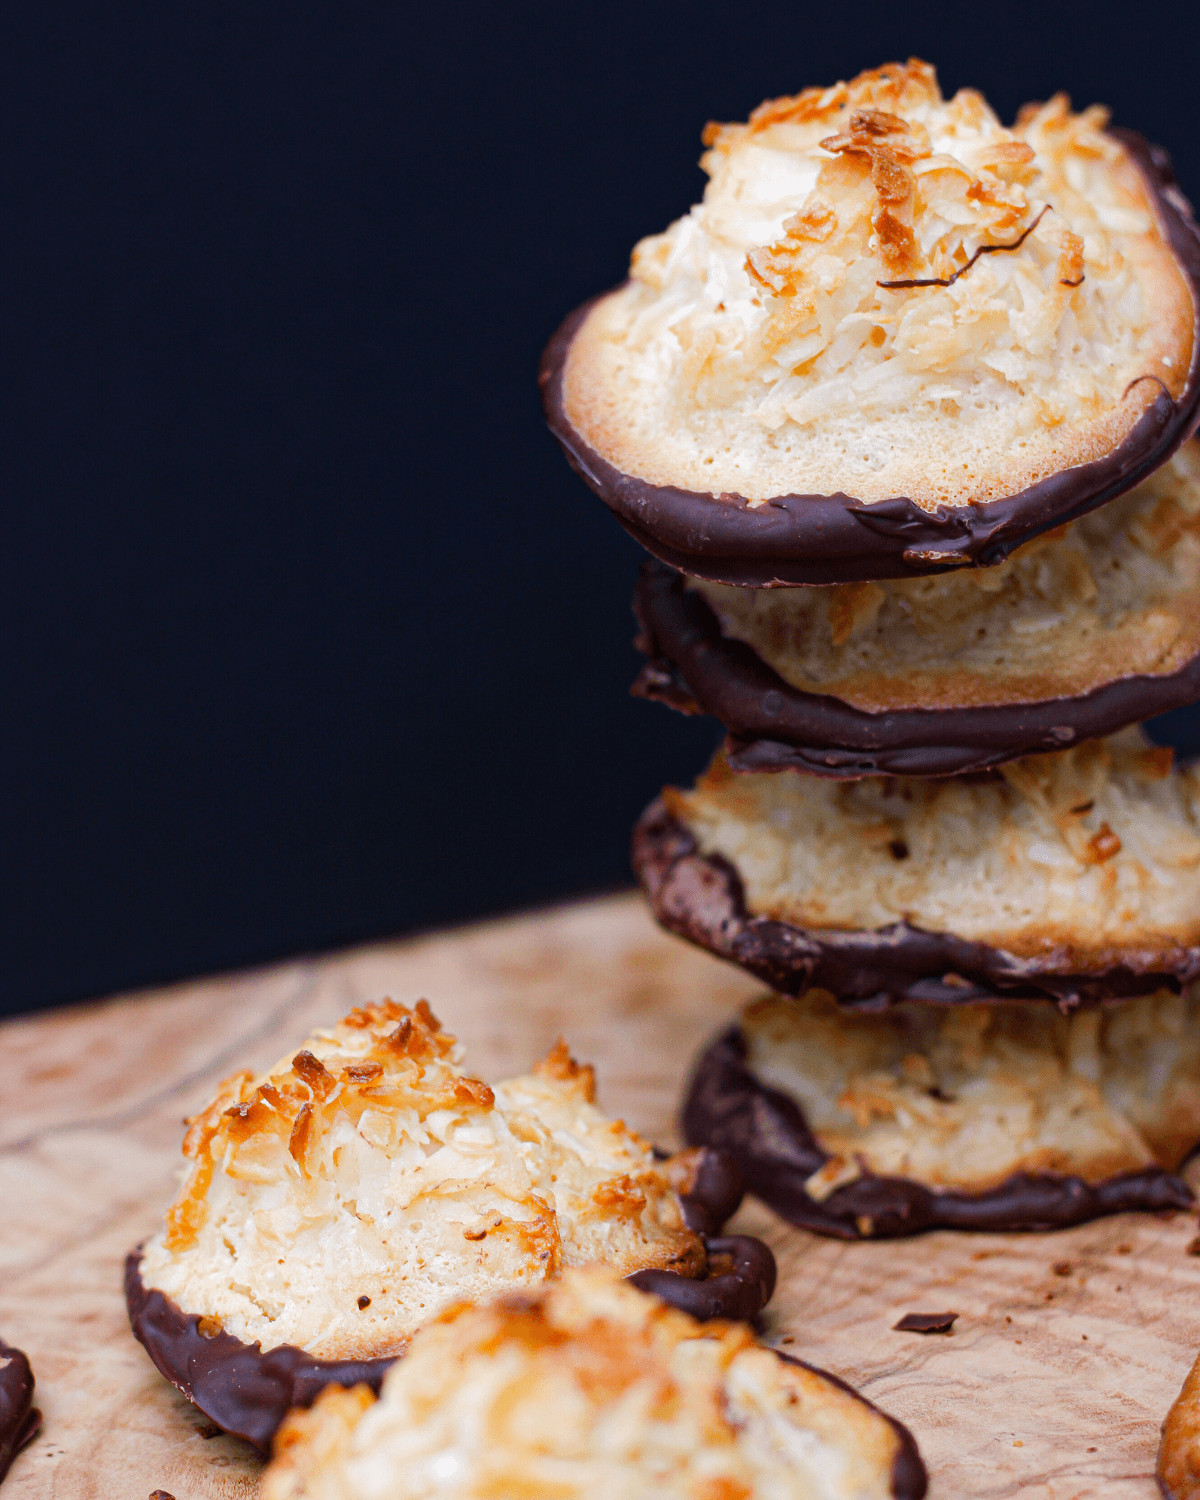 A tall stack of the finished cookies coated in the chocolate.